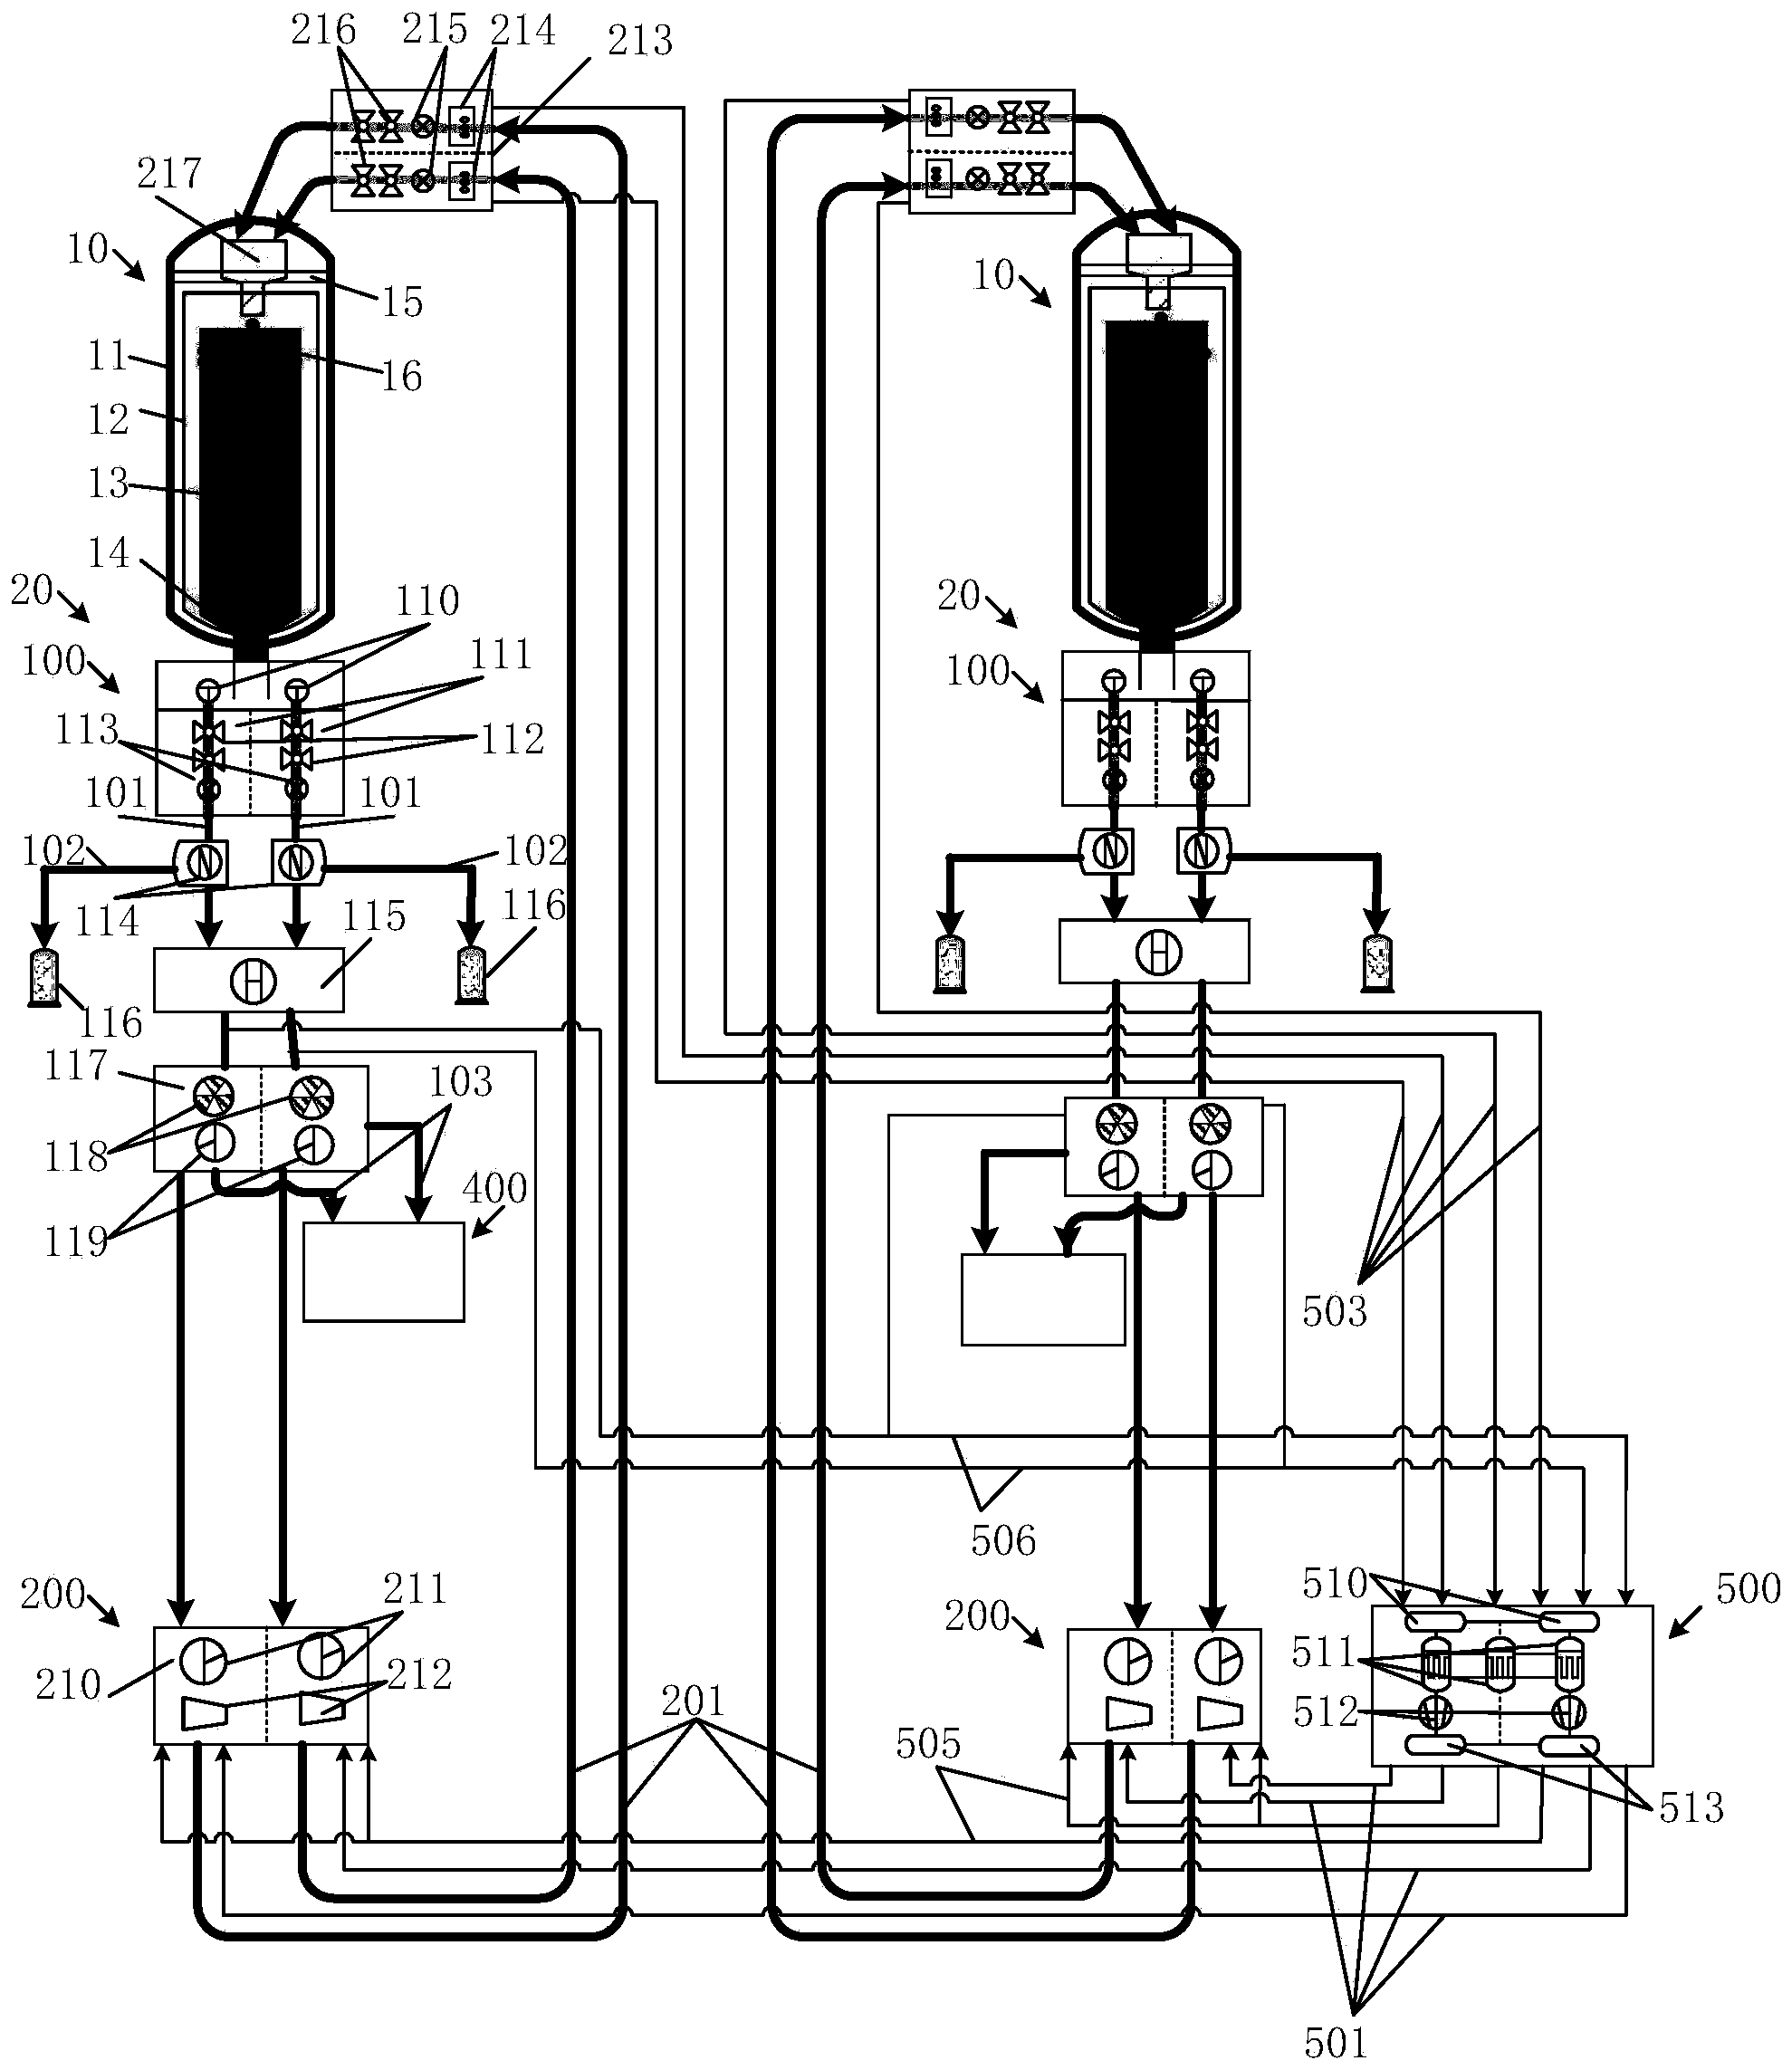 Pebble-bed module type high-temperature gas cooled reactor fuel loading and unloading system